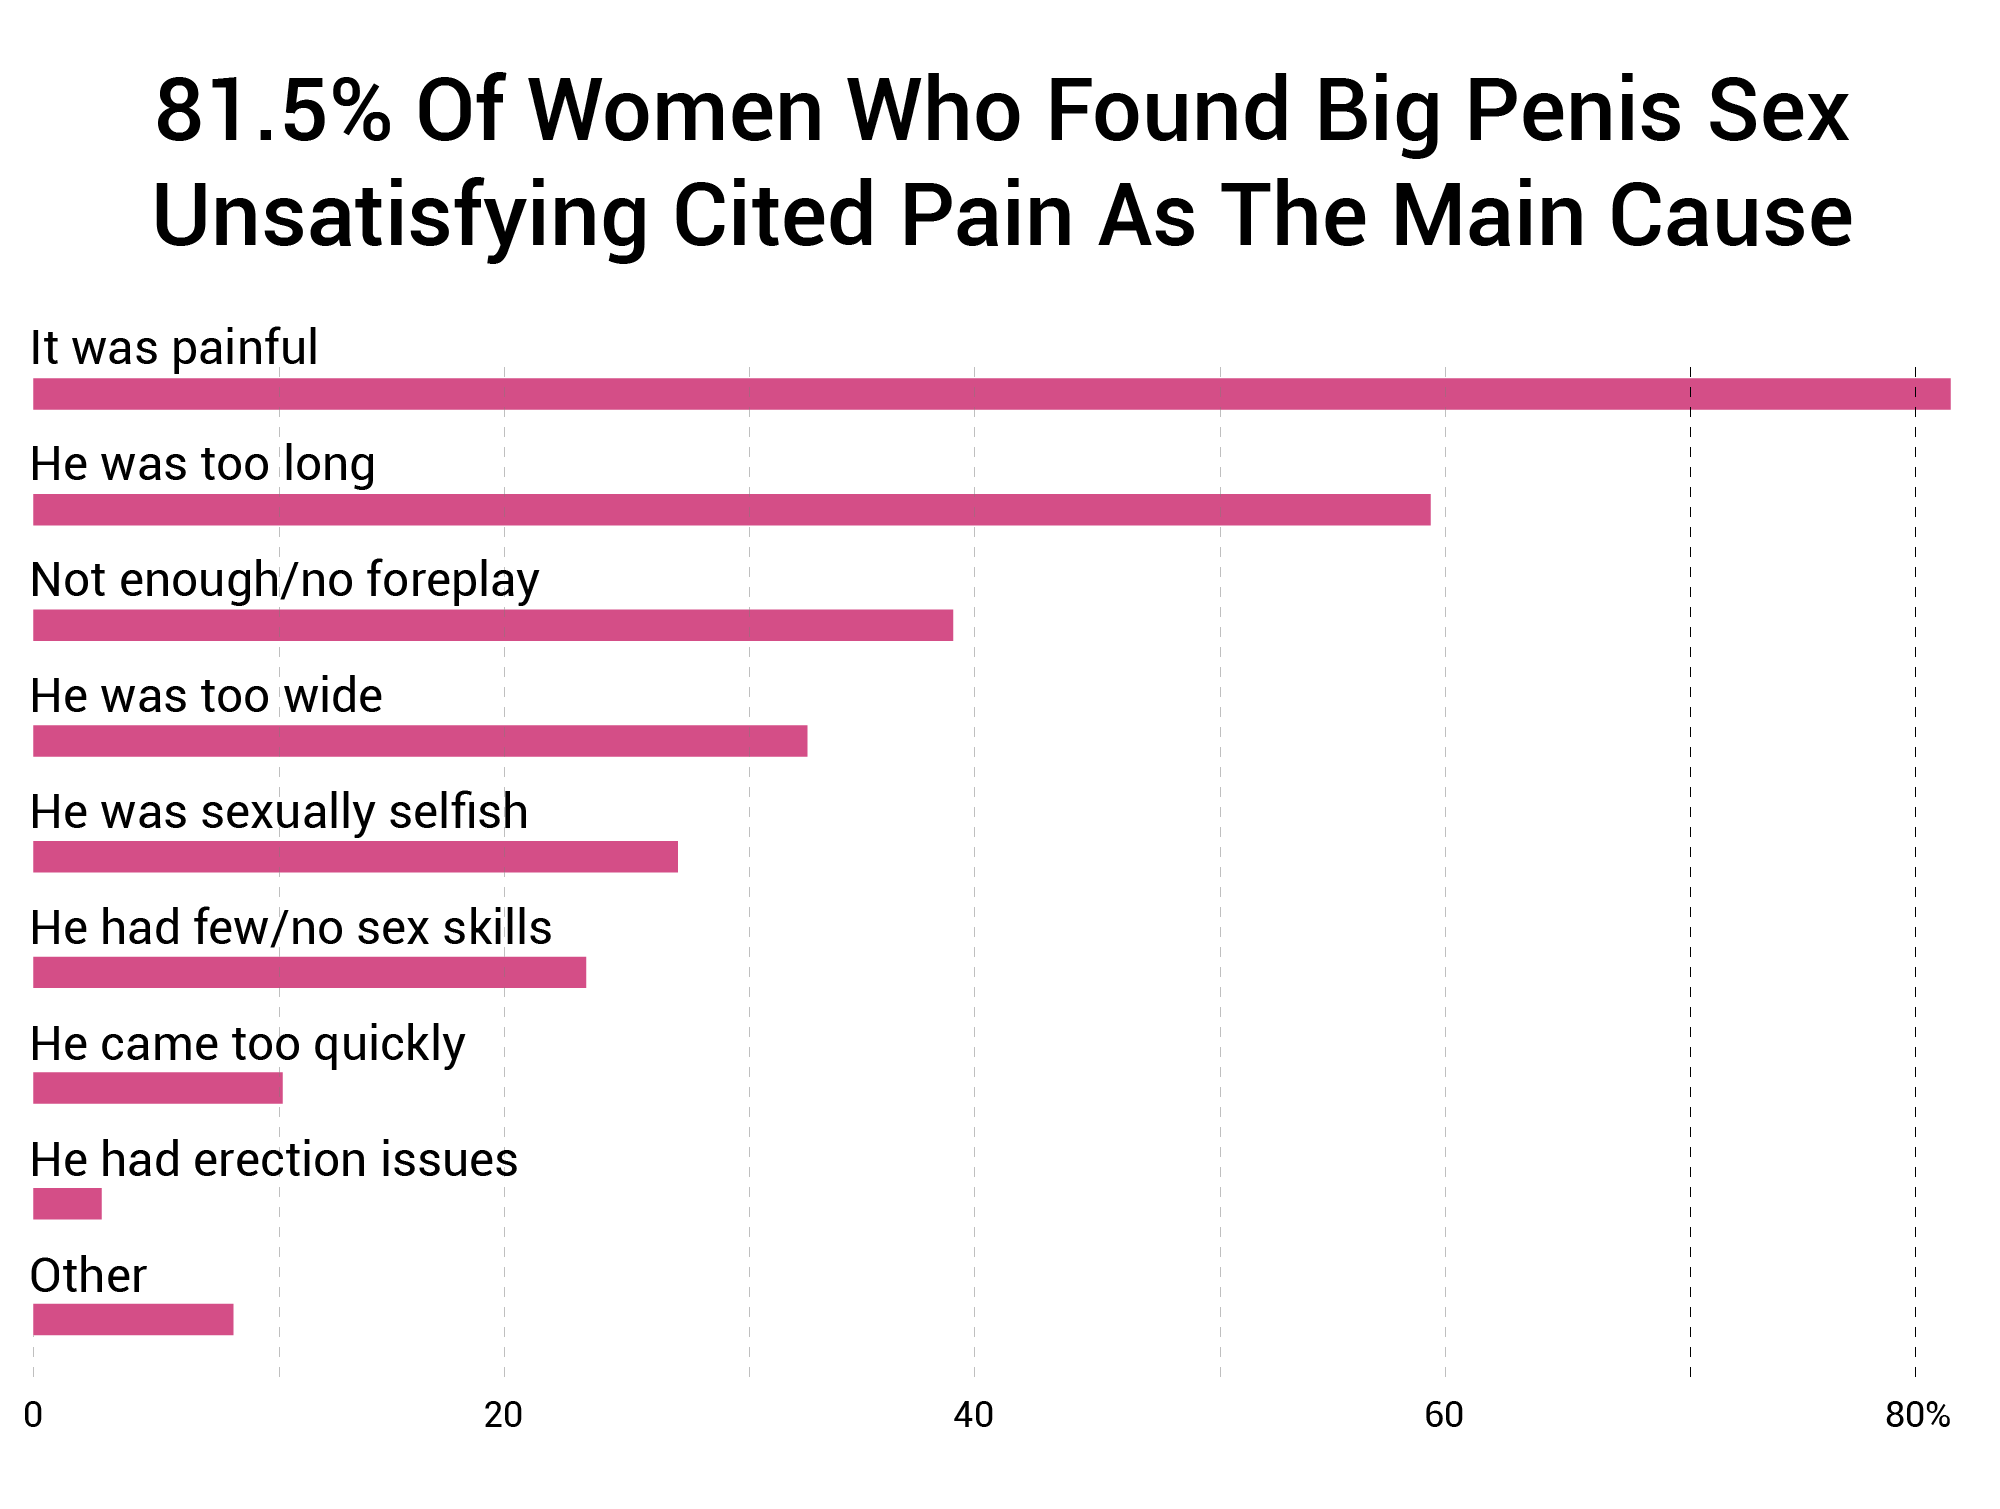 81.5-Of-Women-Who-Found-Big-Penis-Sex-Unsatisfying-Cited-Pain-As-The-Main-Cause.png